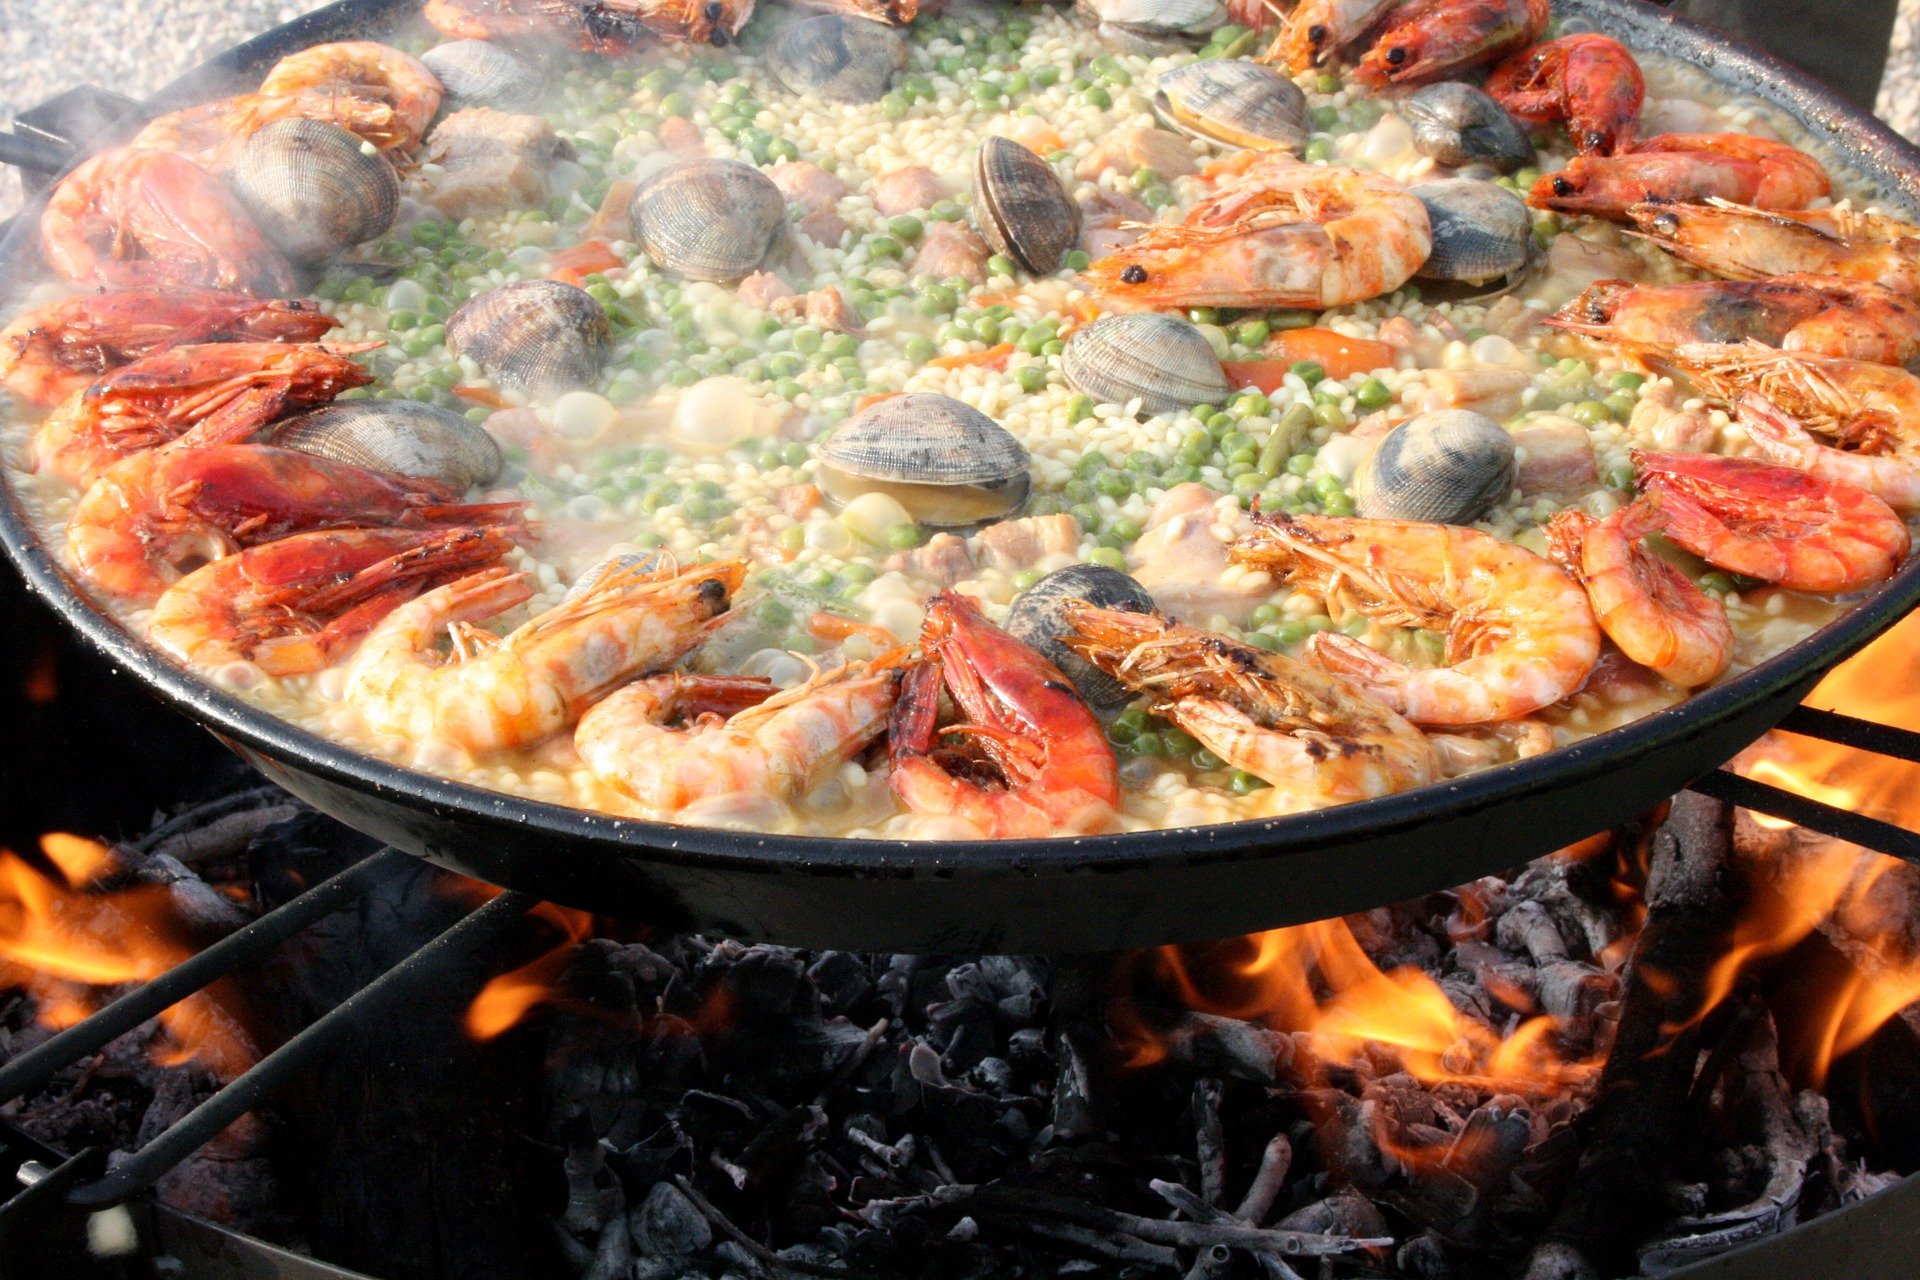 A Paella being prepared in a big frying pan on a barbecue grill